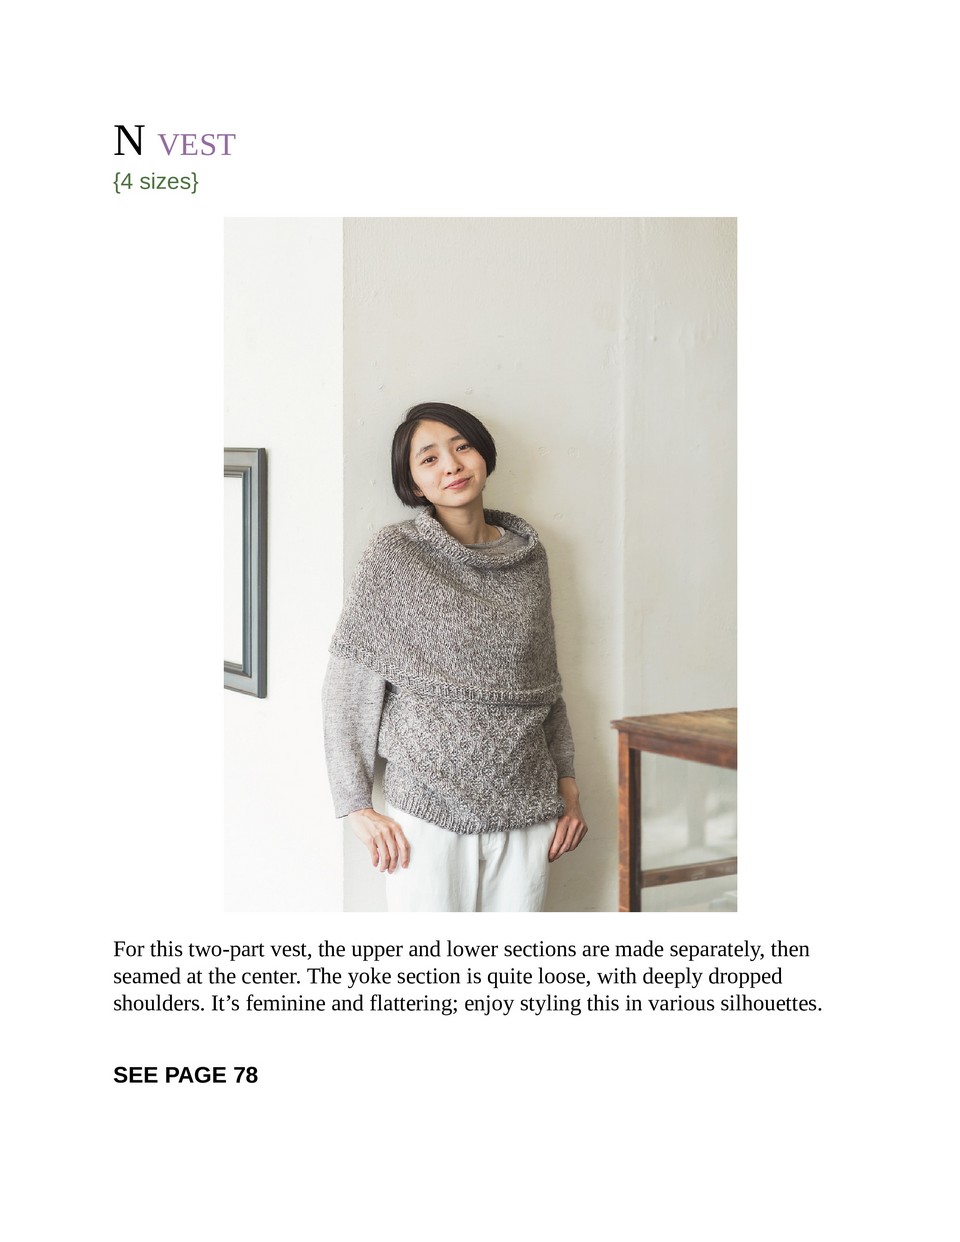 Japanese Knitting Patterns for Sweaters Scarves and More-53